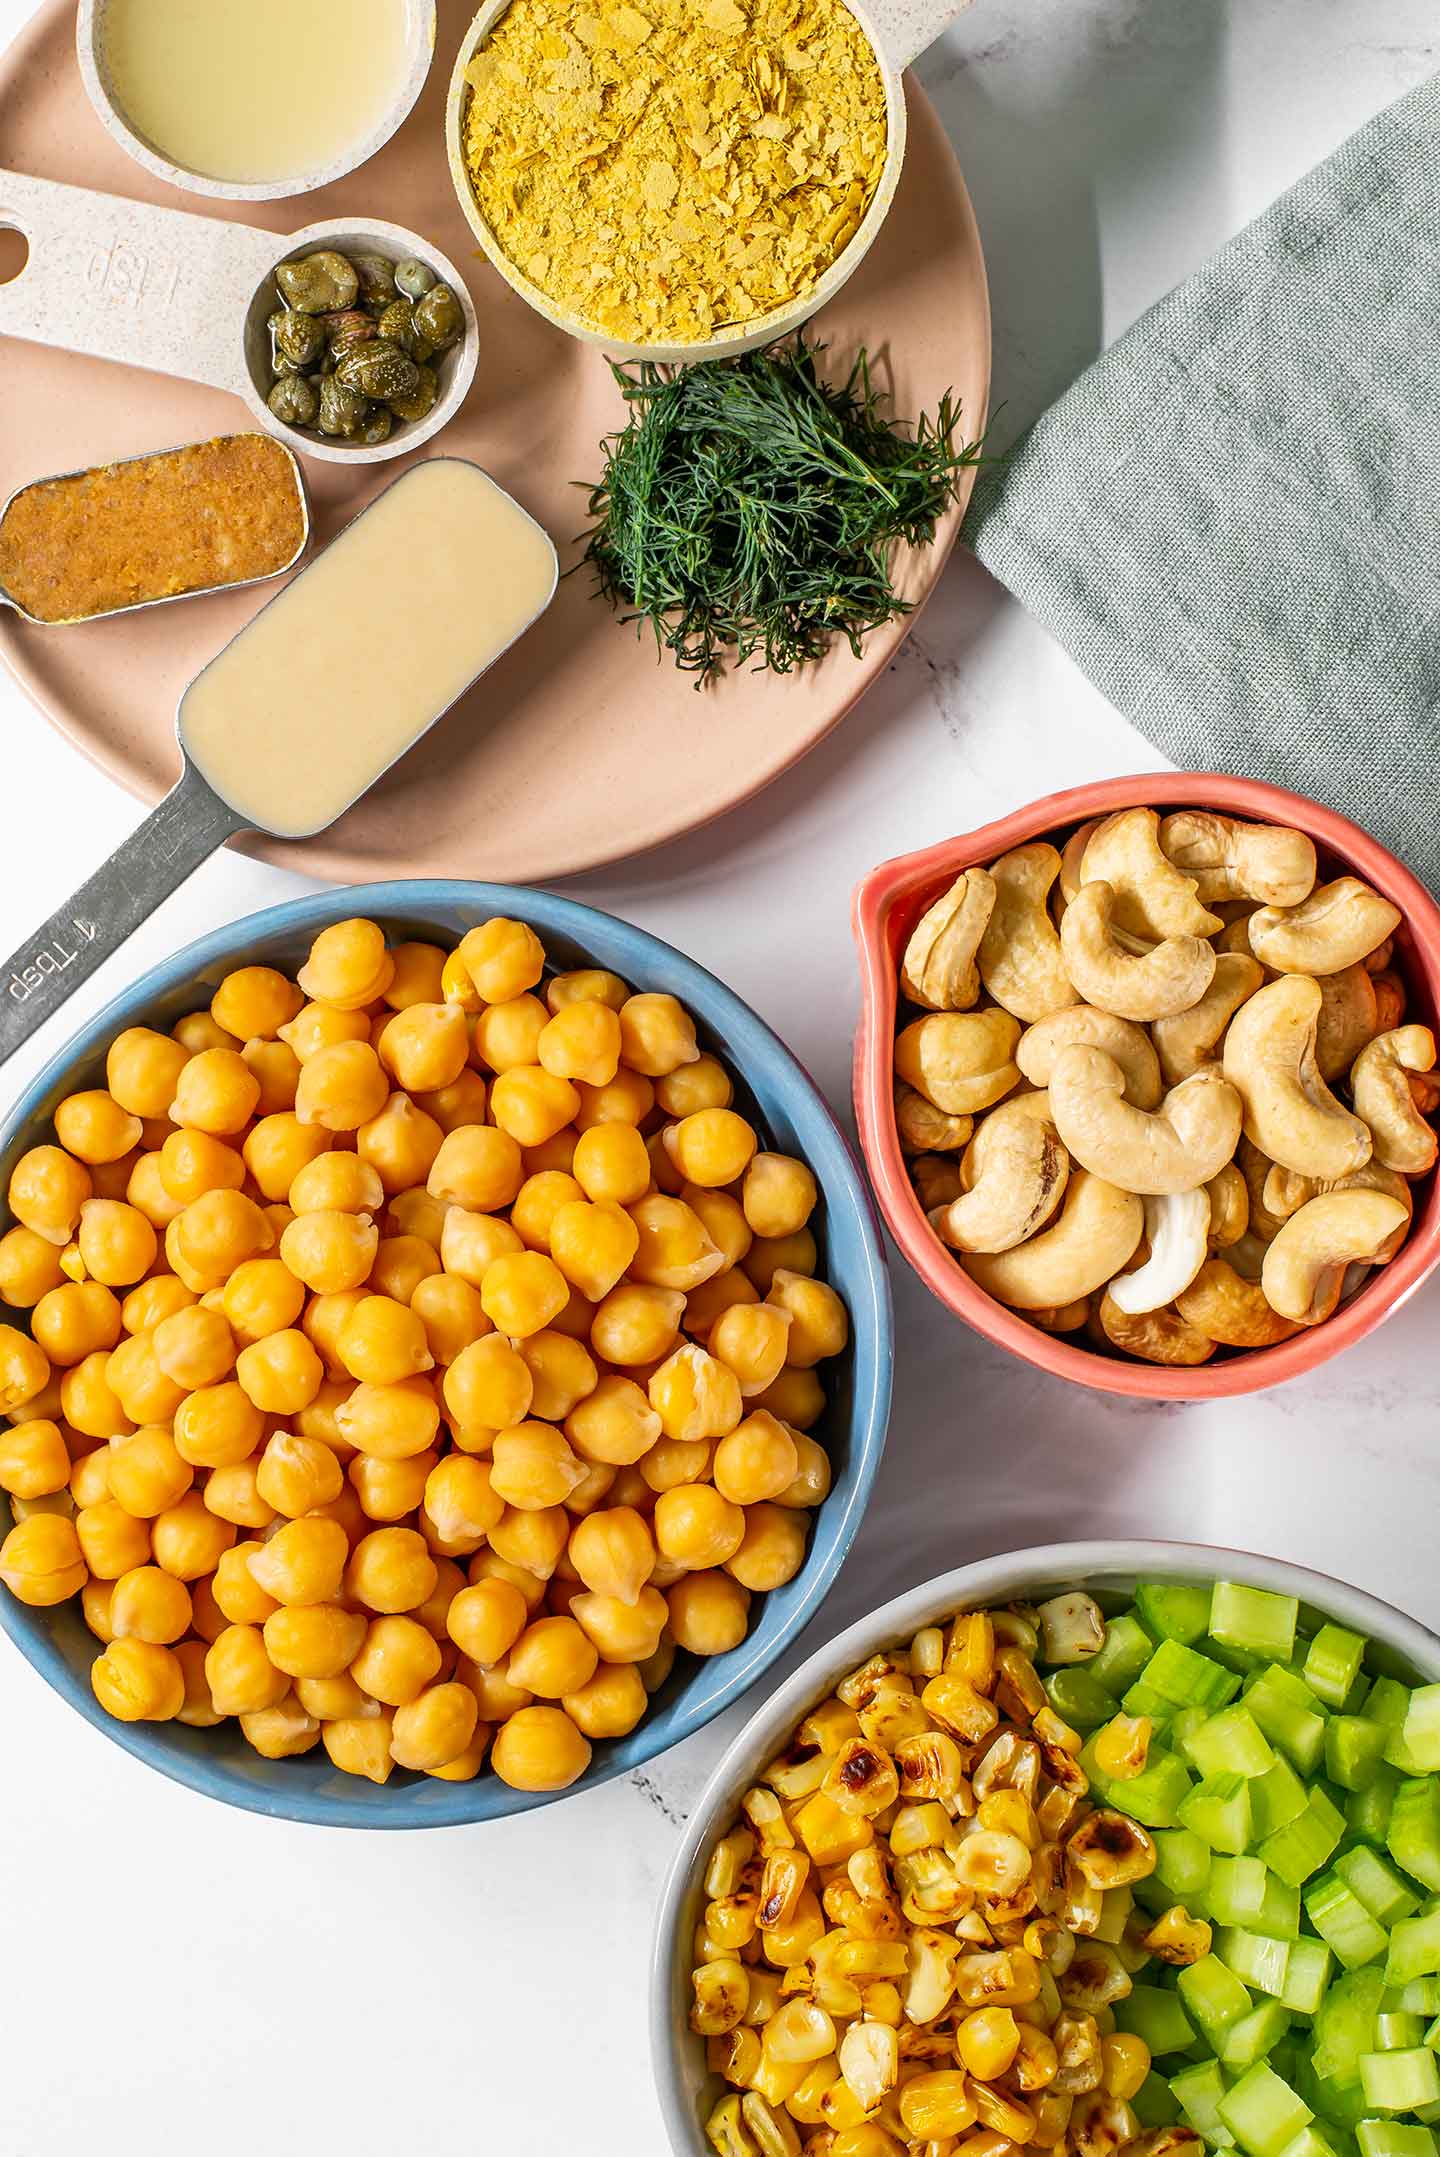 Top down view of ingredients on a white tray. Chickpeas, cashews, charred corn, celery, and a plate of seasonings.